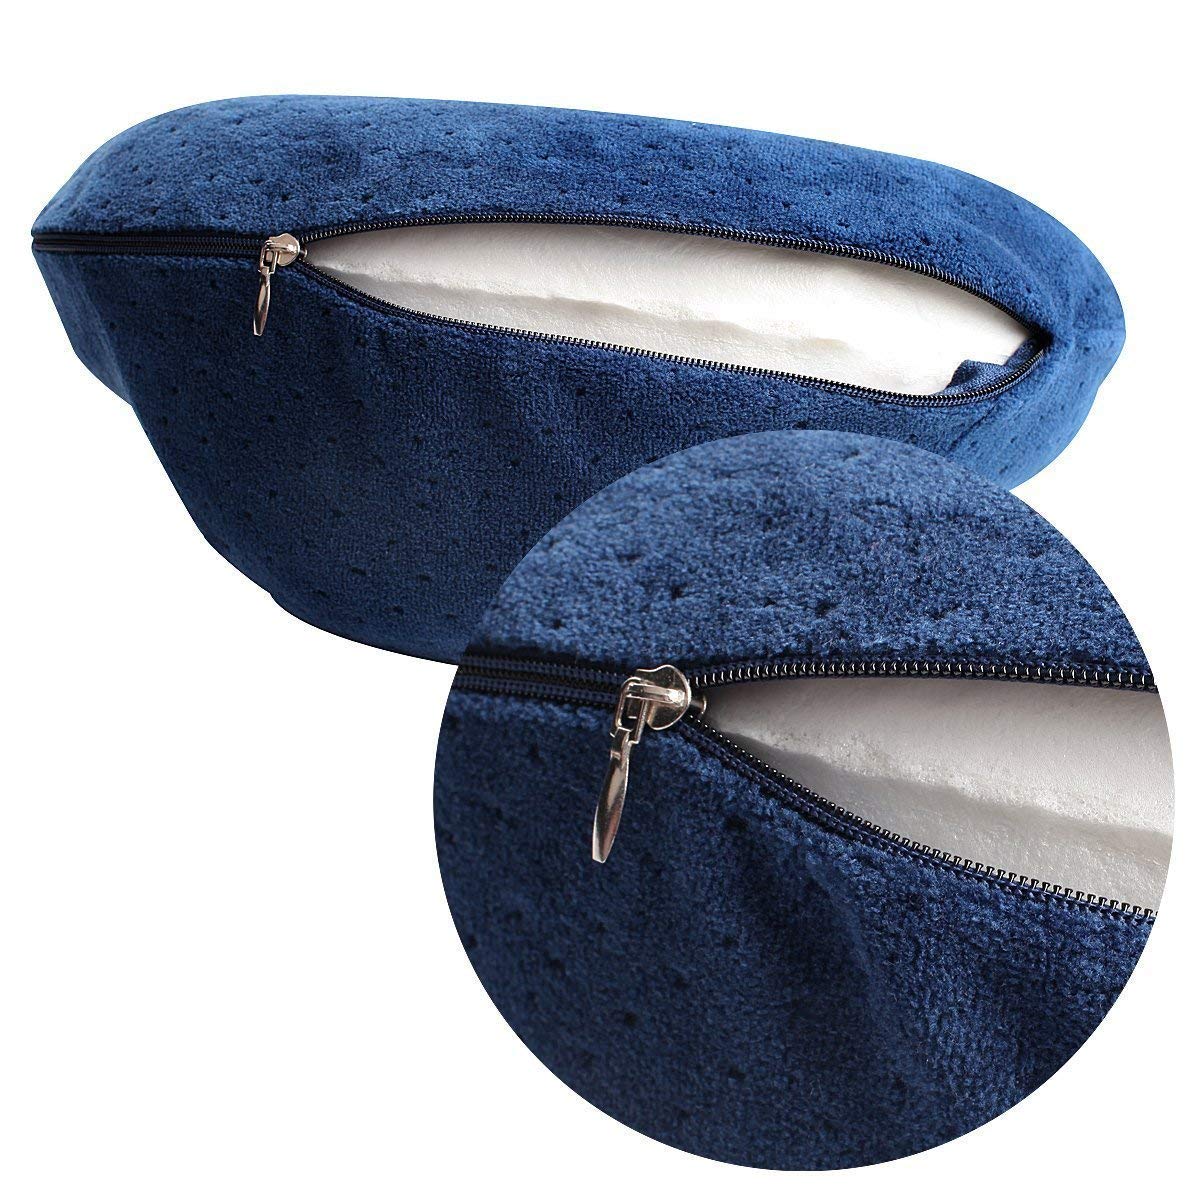 Bookishbunny Memory Foam XL U Shape Travel Pillow Neck And Head Support Large Cervical Cushion Navy Blue